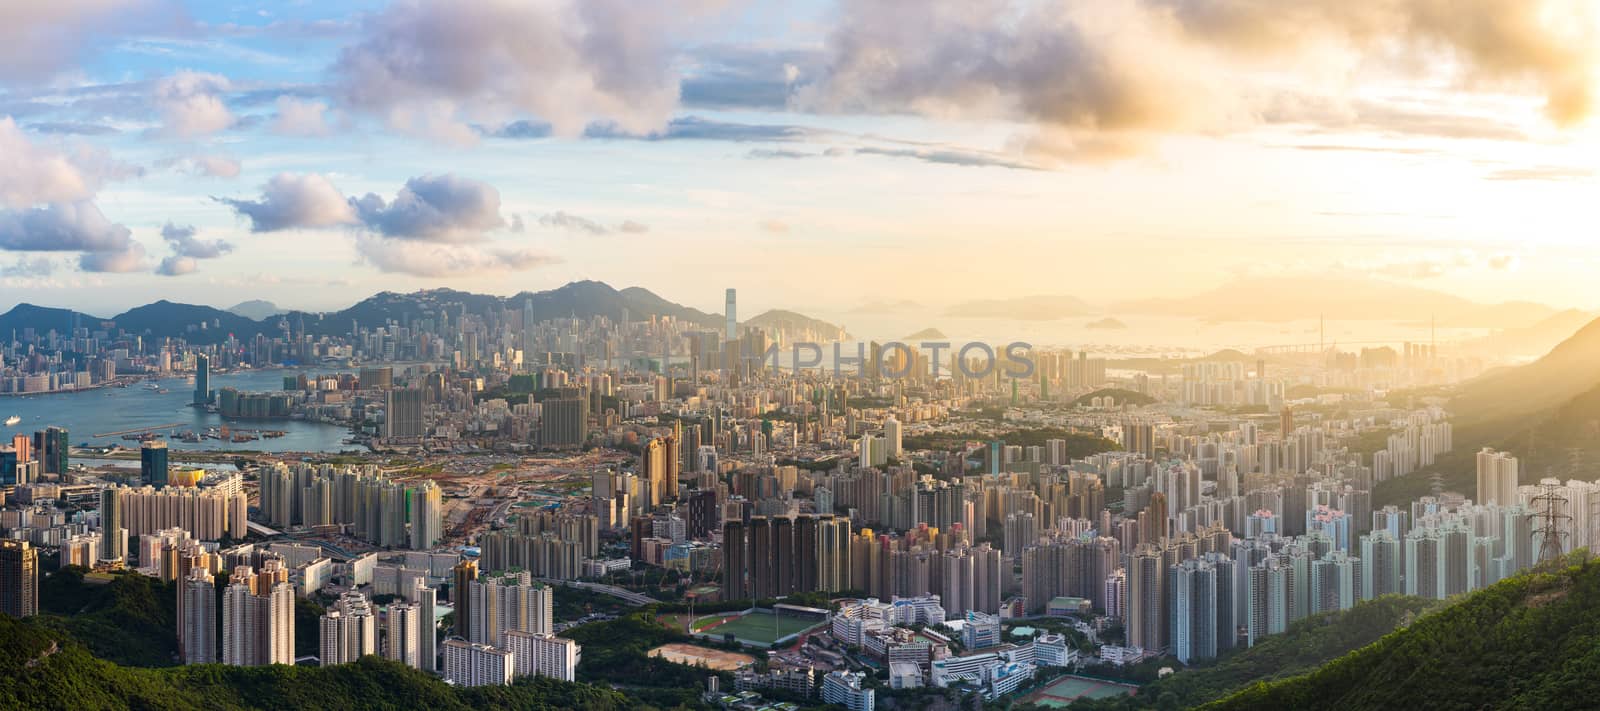 Hong Kong Skyline Kowloon from Fei Ngo Shan hill or Kowloon Viewing Point sunset panorama